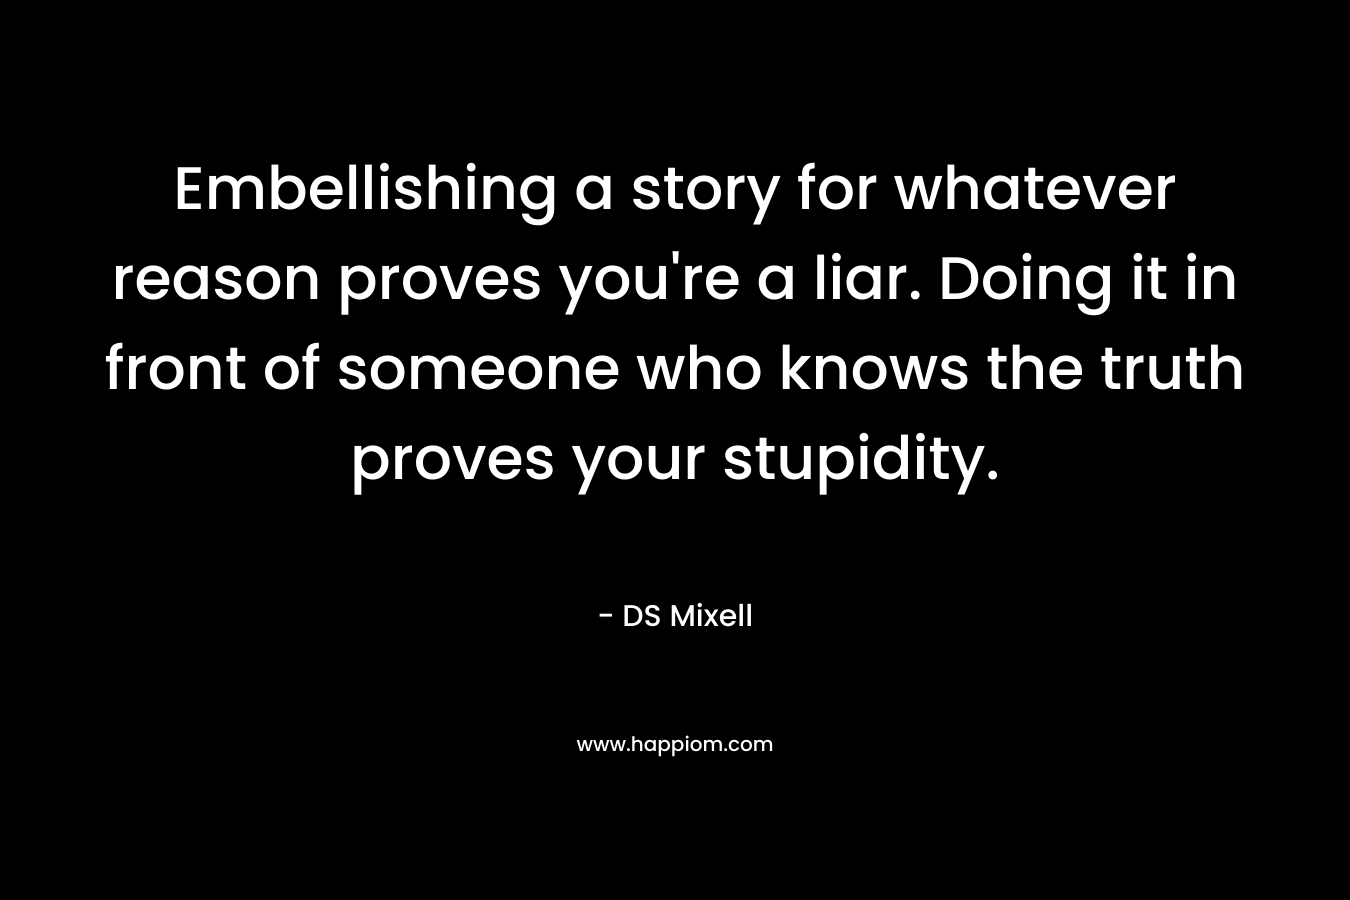 Embellishing a story for whatever reason proves you’re a liar. Doing it in front of someone who knows the truth proves your stupidity. – DS Mixell